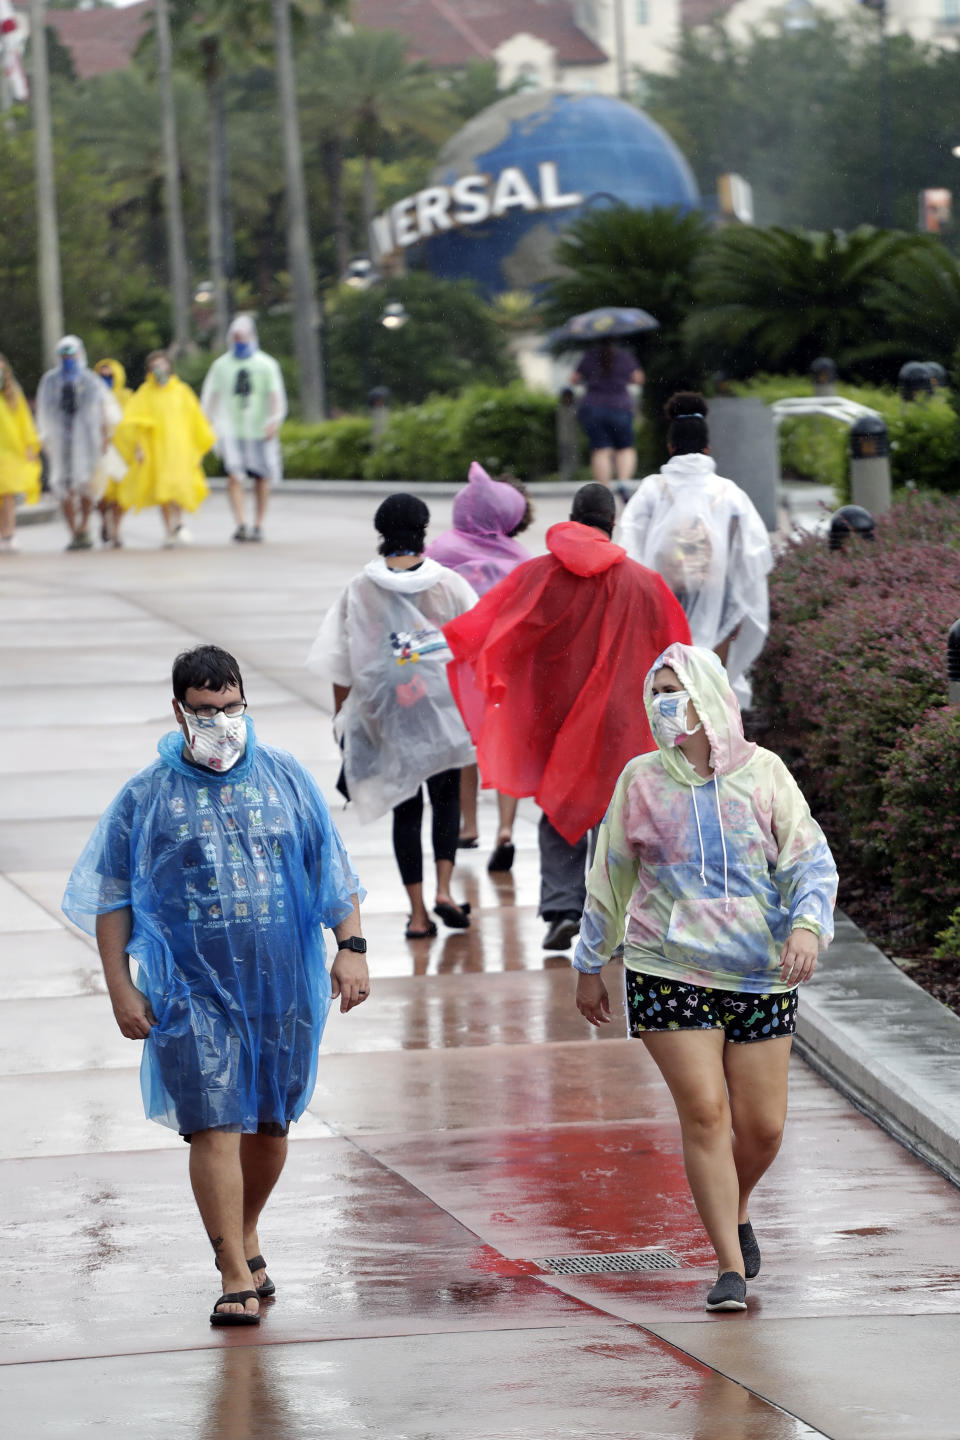 In this Wednesday, June 3, 2020 photo, guests brave a rainy day at Universal Studios Wednesday, June 3, 2020, in Orlando, Fla. The Universal Studios theme park has reopened for season pass holders and will open to the general public on Friday, June 5. (AP Photo/John Raoux)